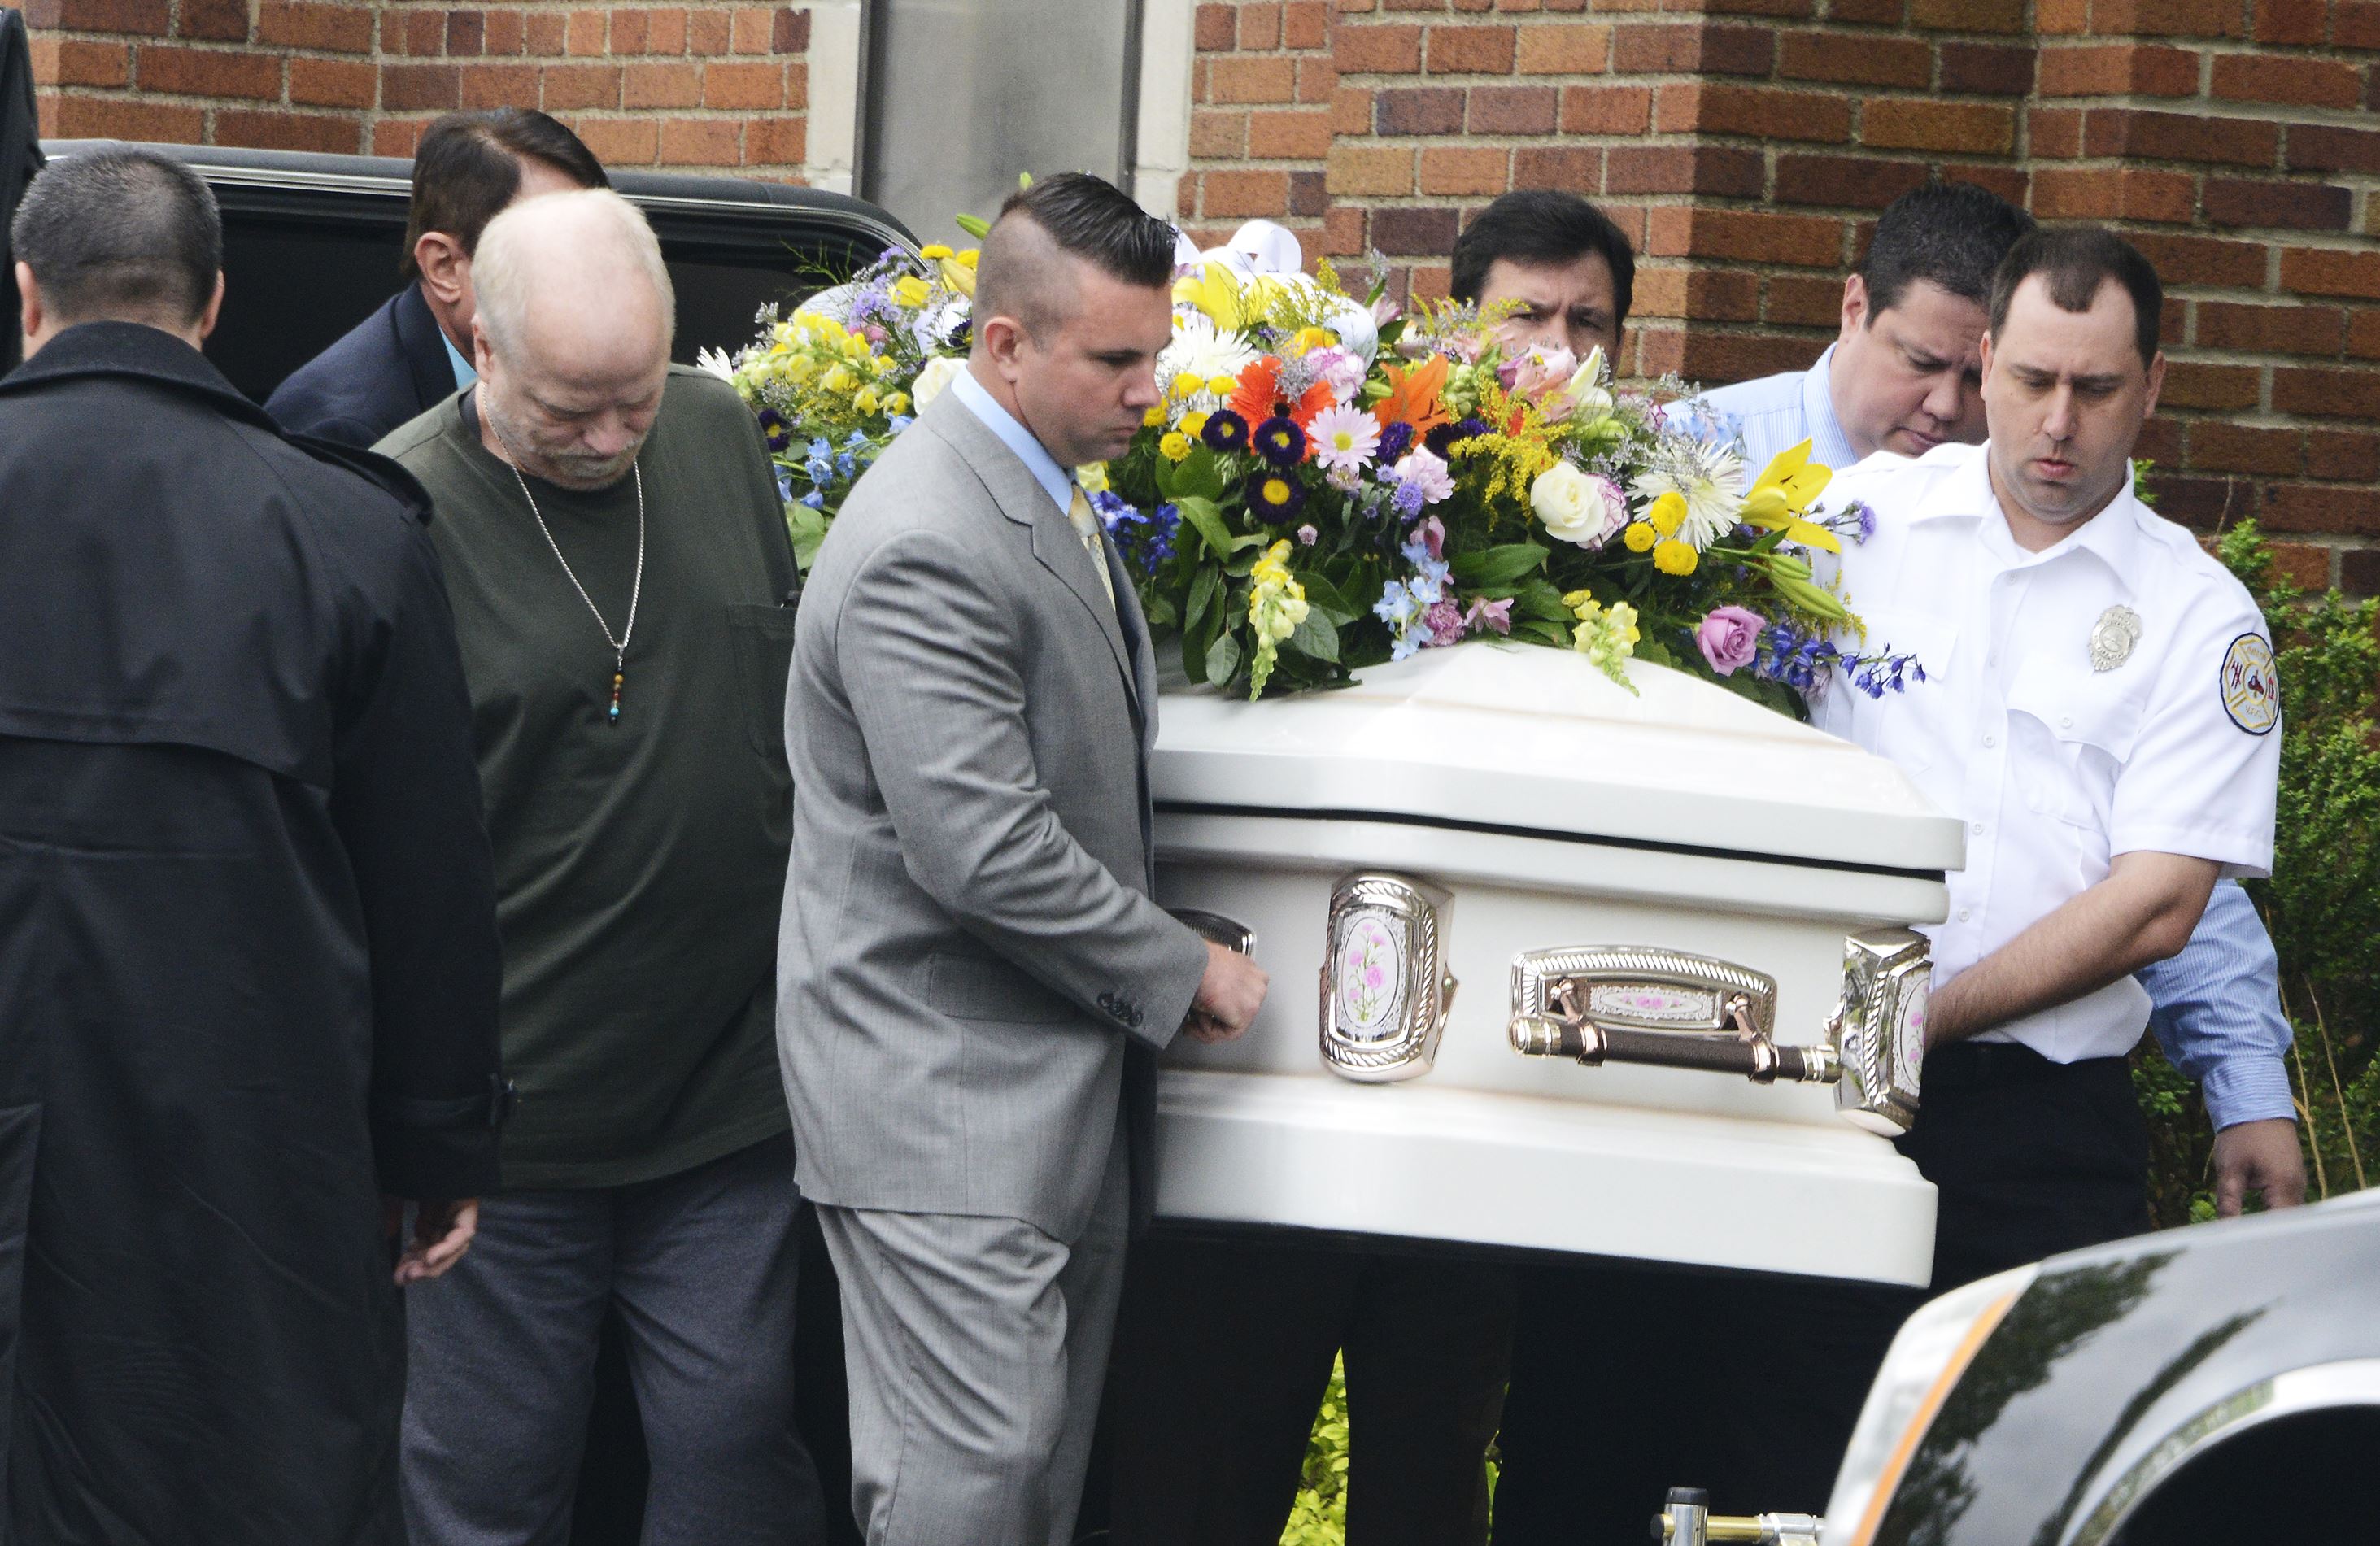 Bellevue family interred following funeral service led by family member | Pittsburgh ...